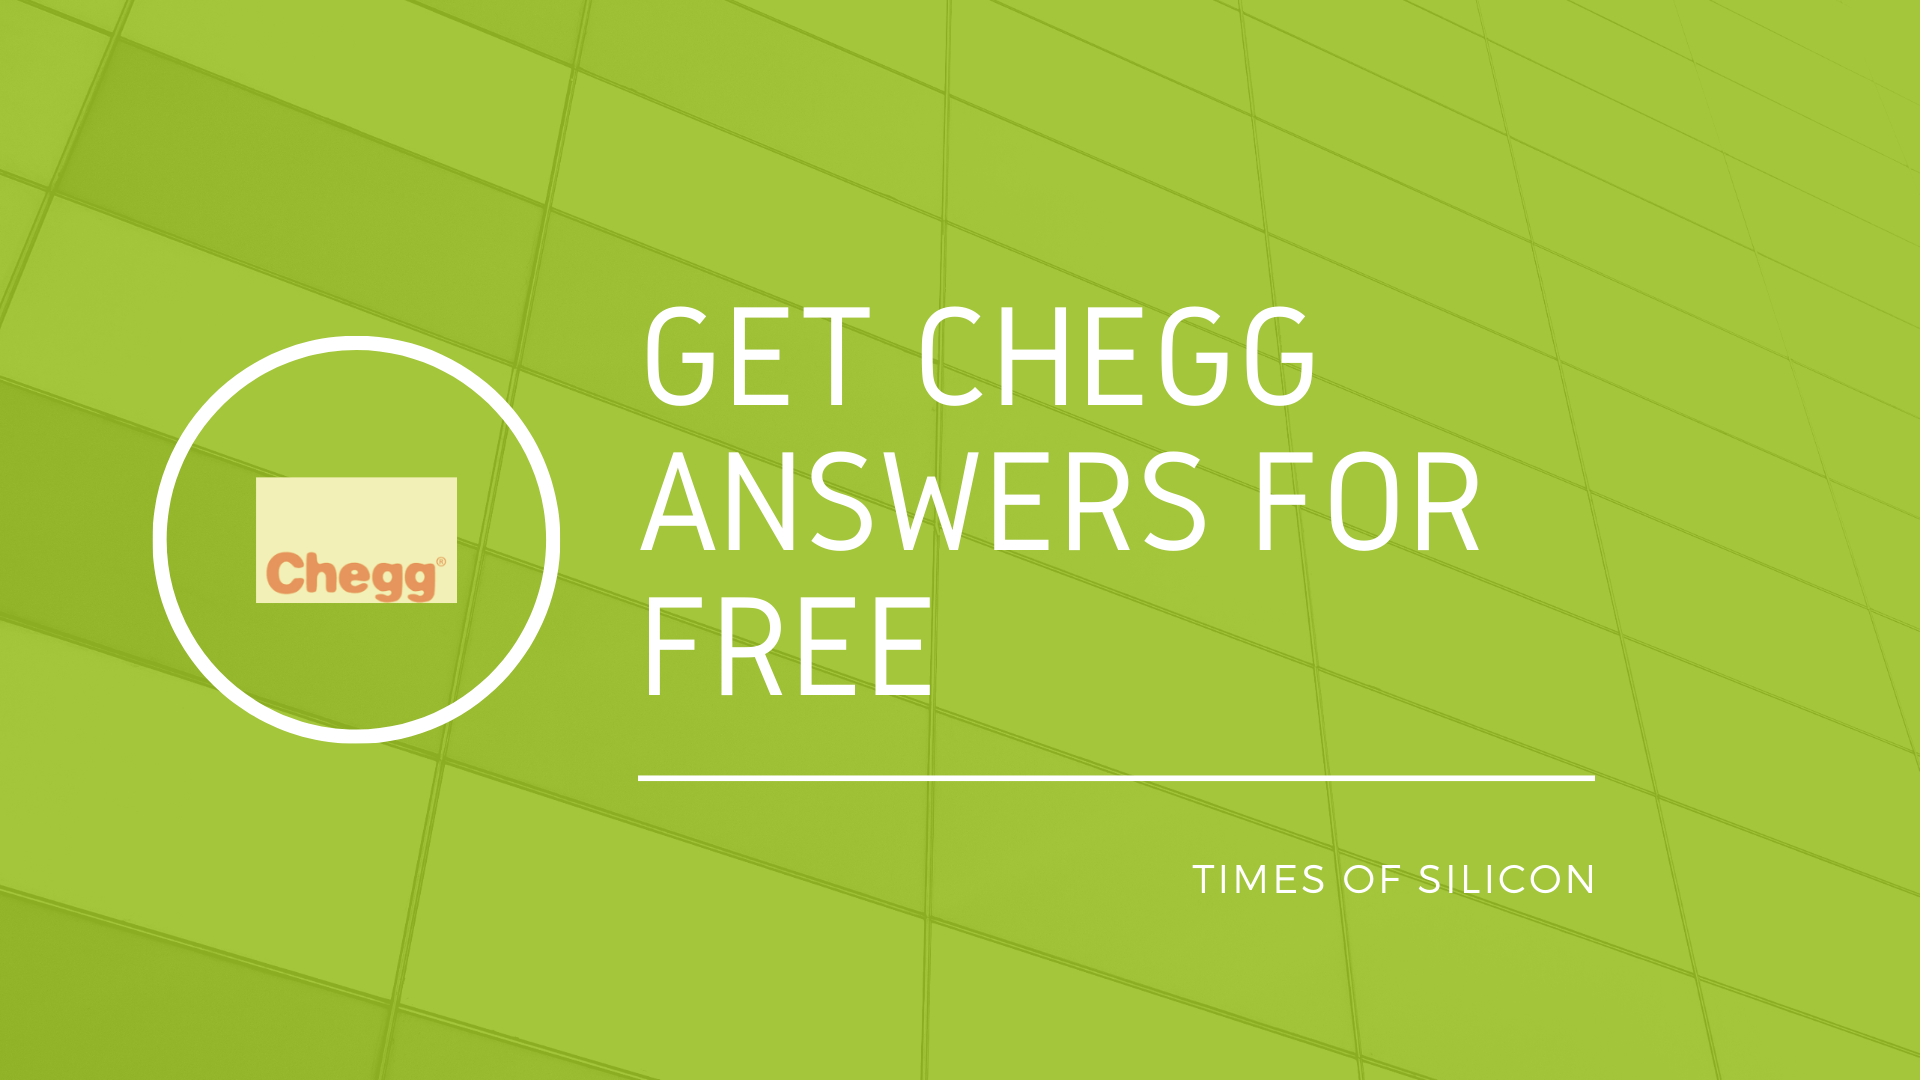 Get Chegg Answers Free